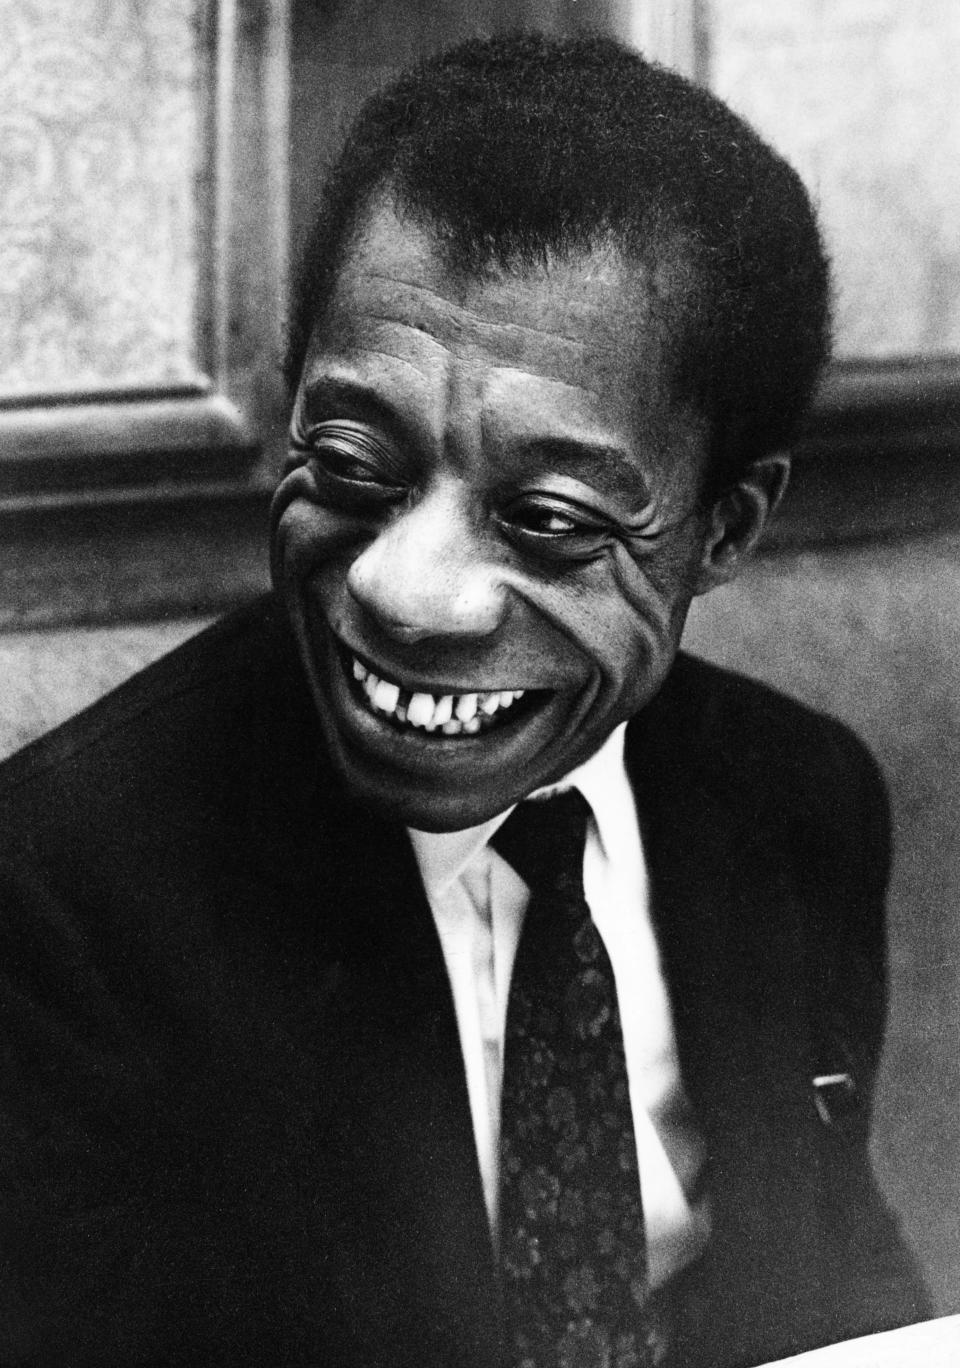 James Baldwin wrote the classics novels "Go Tell It On The Mountain" and "Giovanni's Room."&nbsp;